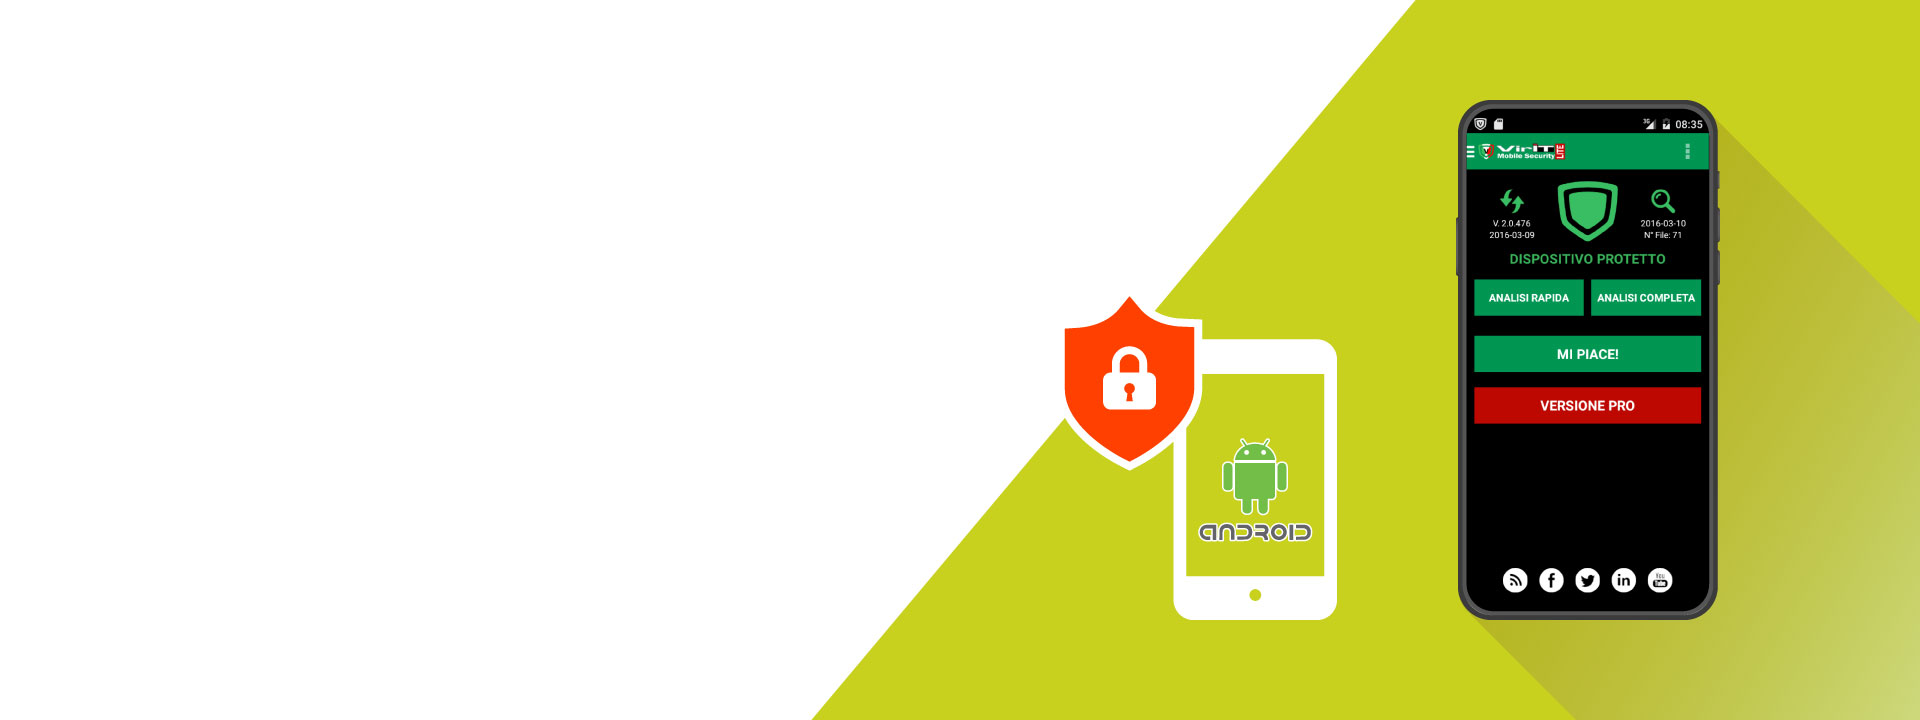 Vir.IT Mobile Security - The Antivirus that protects you from the threats for your Android device